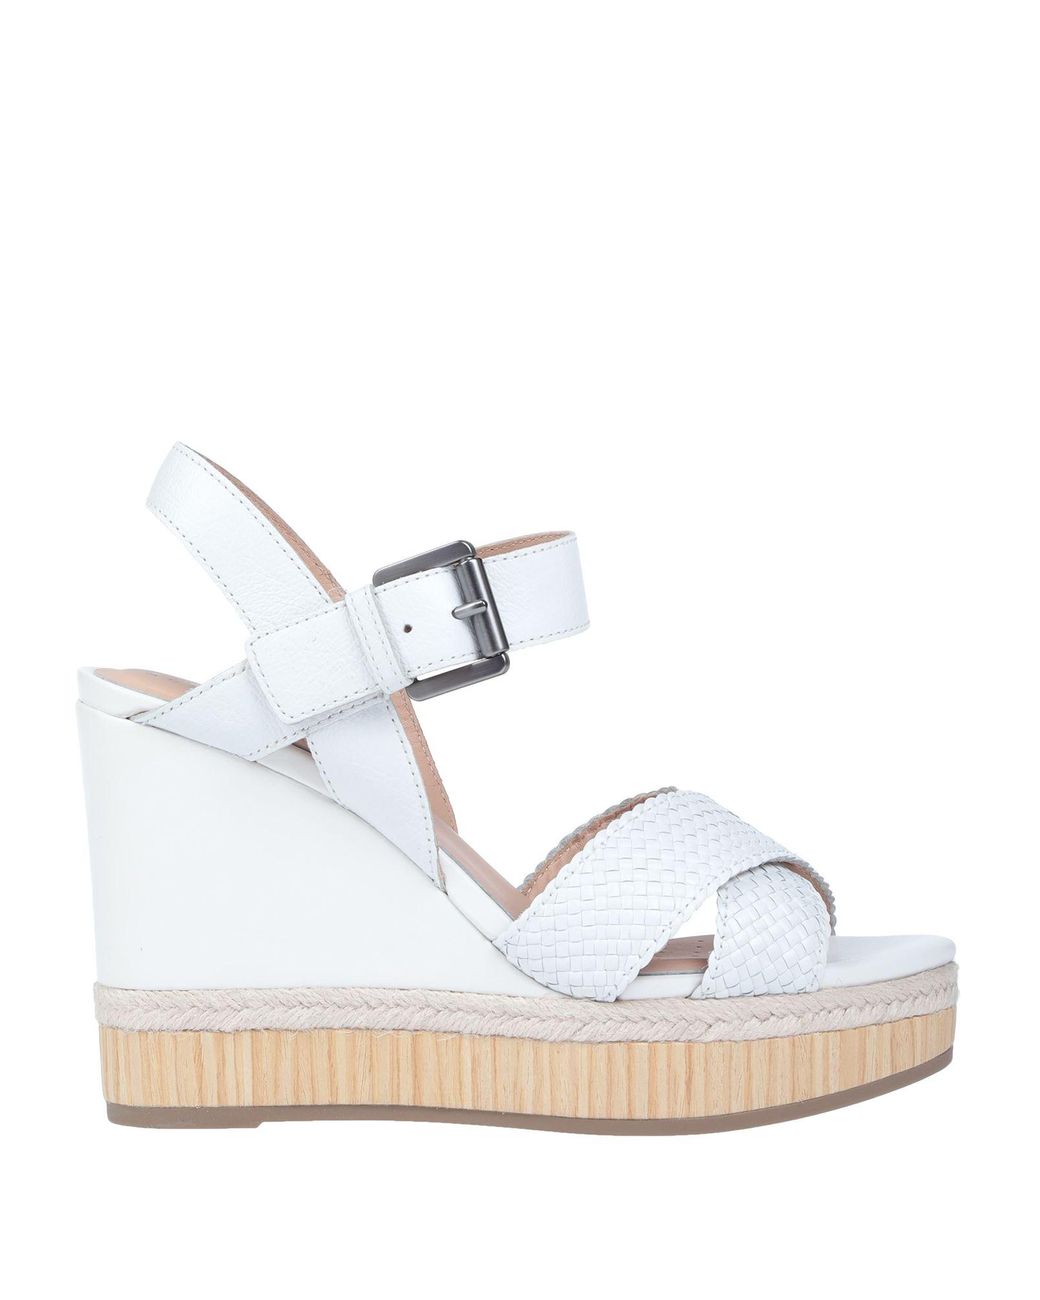 Geox Leather Sandals in White - Lyst